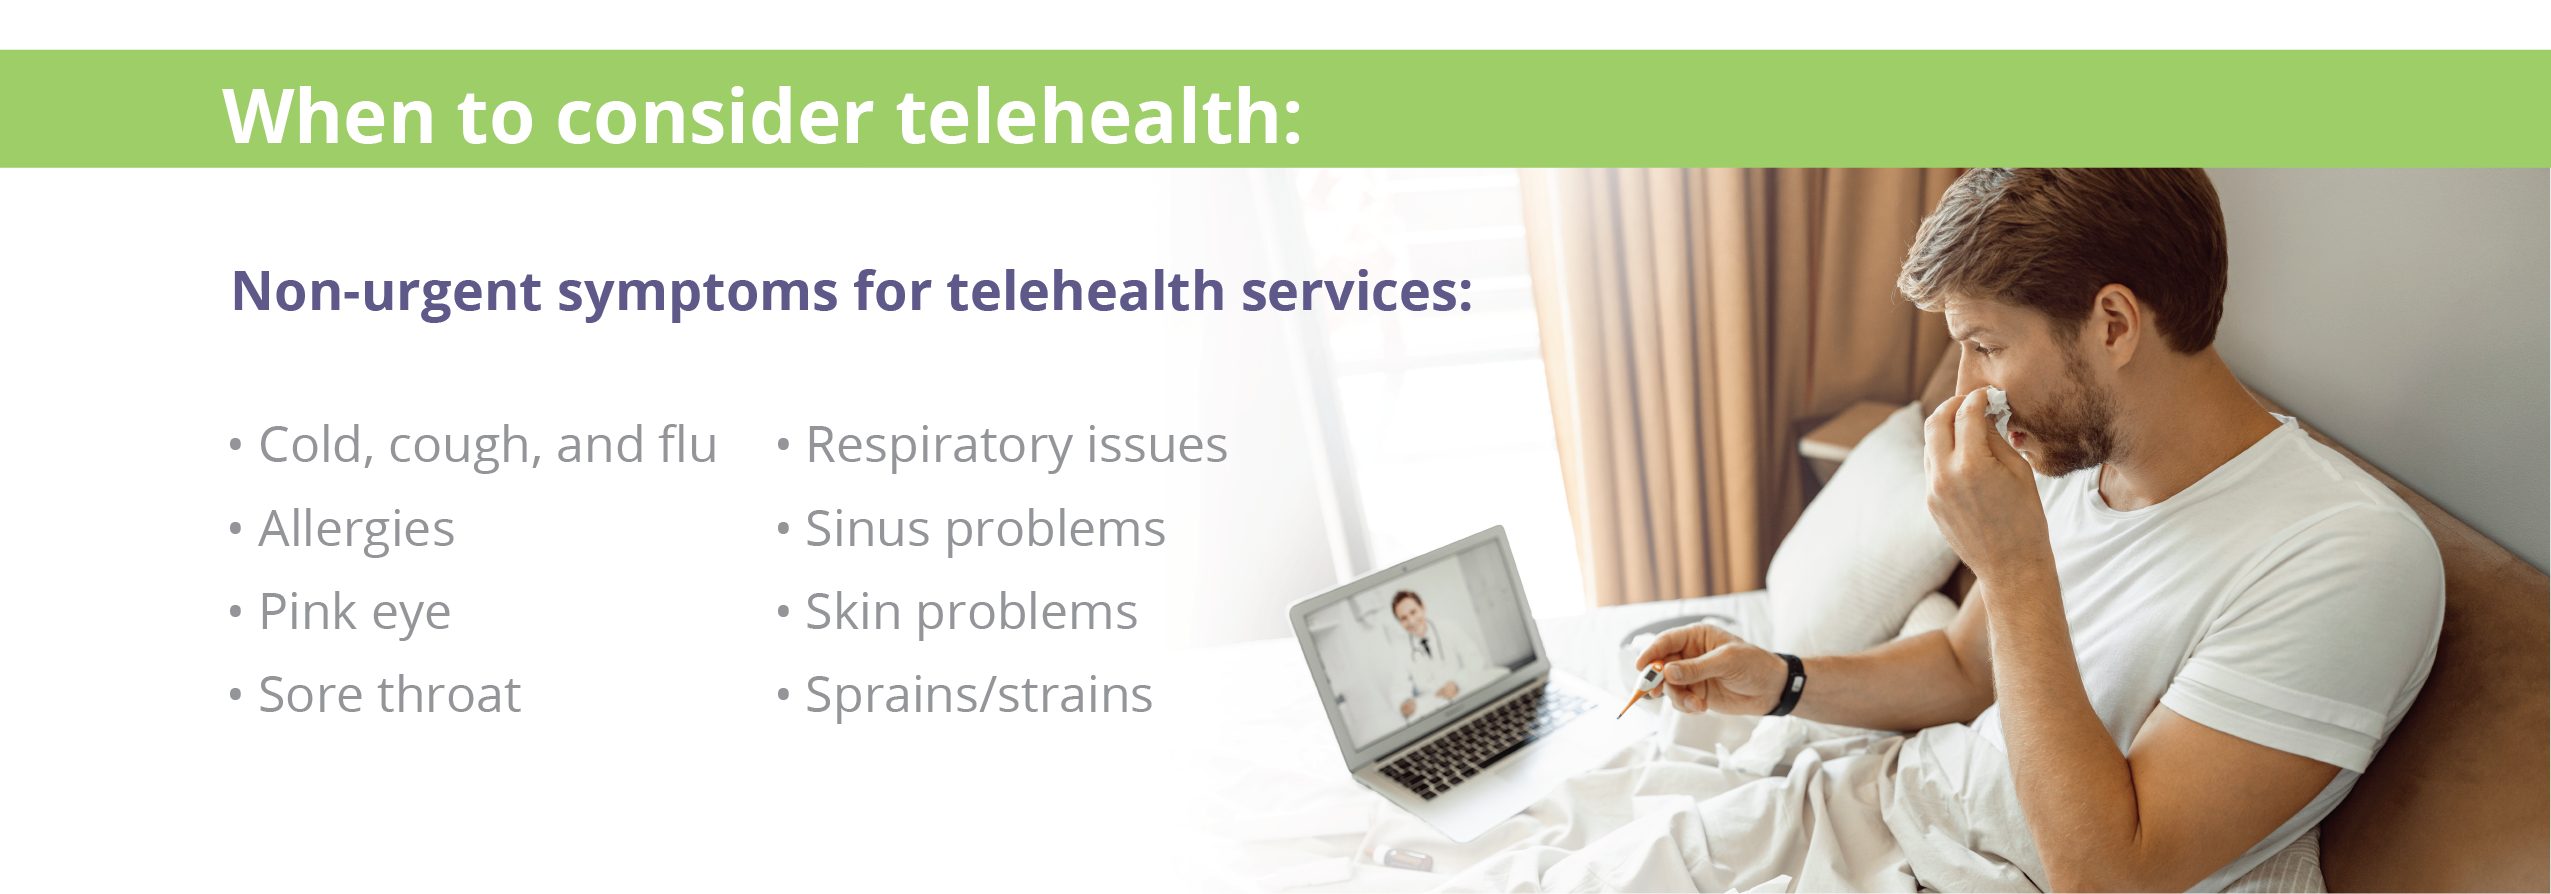 When to consider telehealth